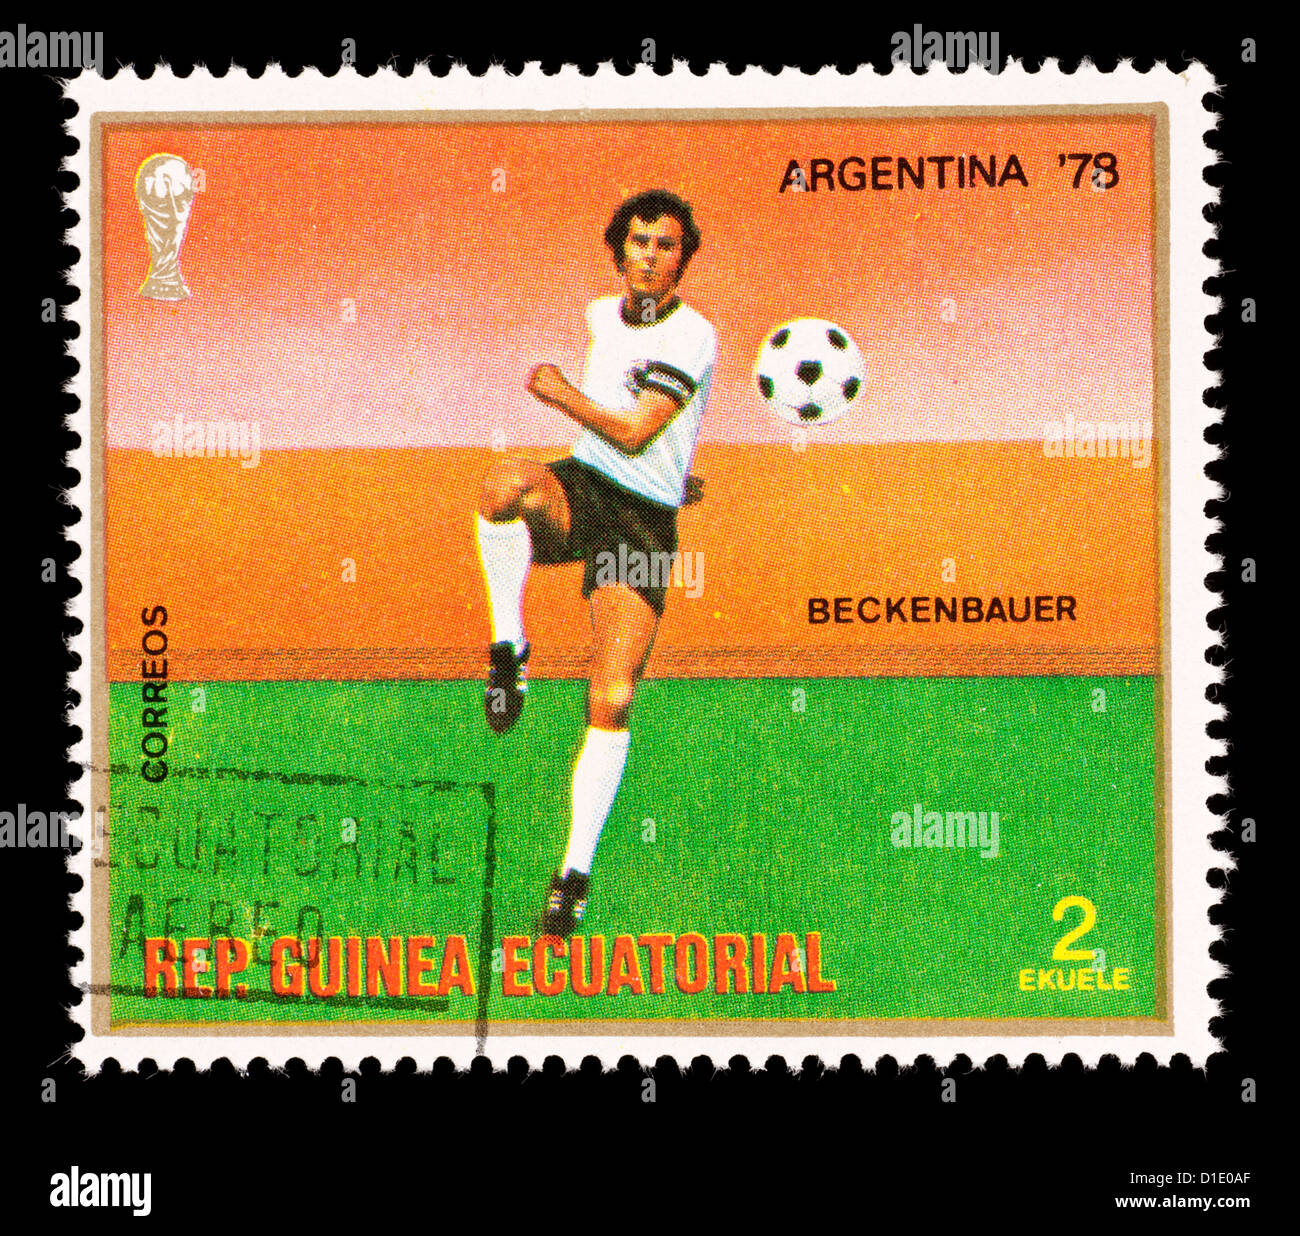 Postage stamp from Equatorial Guinea depicting a soccer player, issued for the 1978 World Cup. Stock Photo